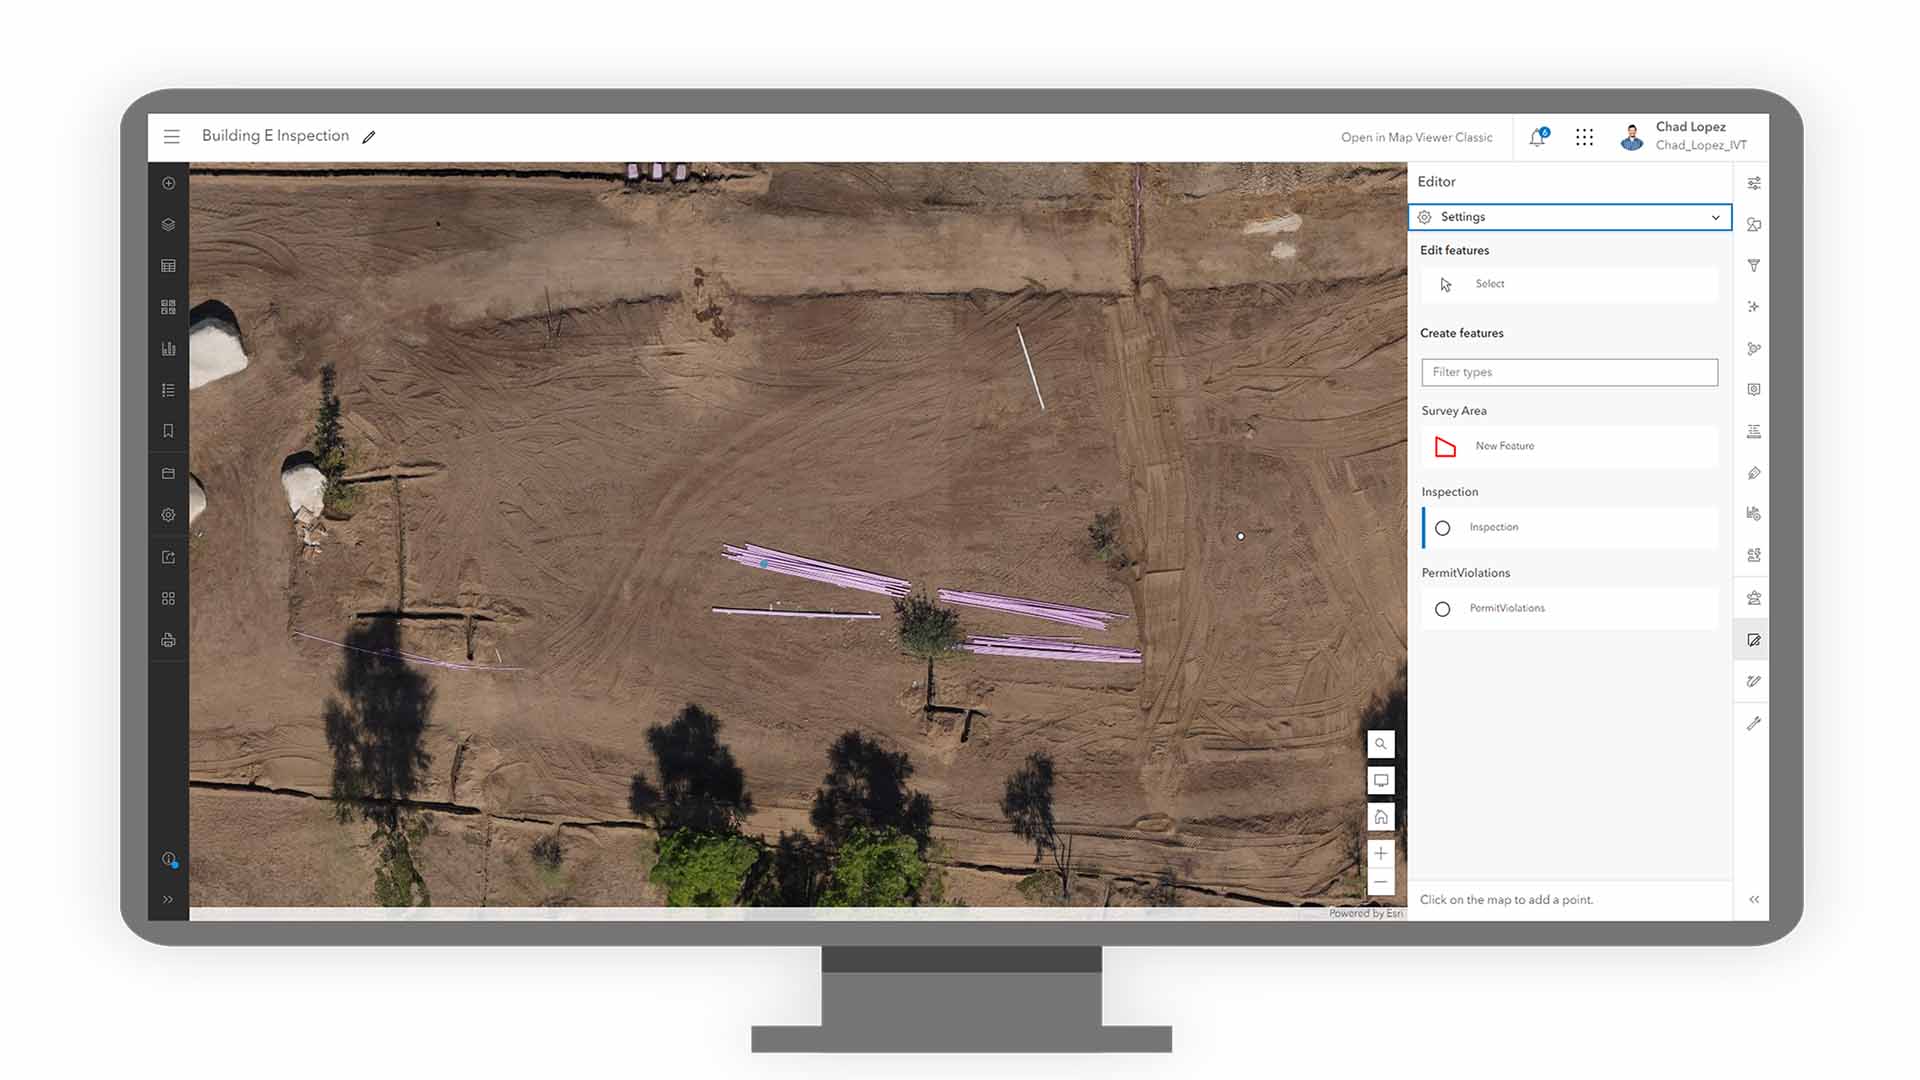 Users can make observations on drone-derived imagery in ArcGIS to have them appear in Field Maps.